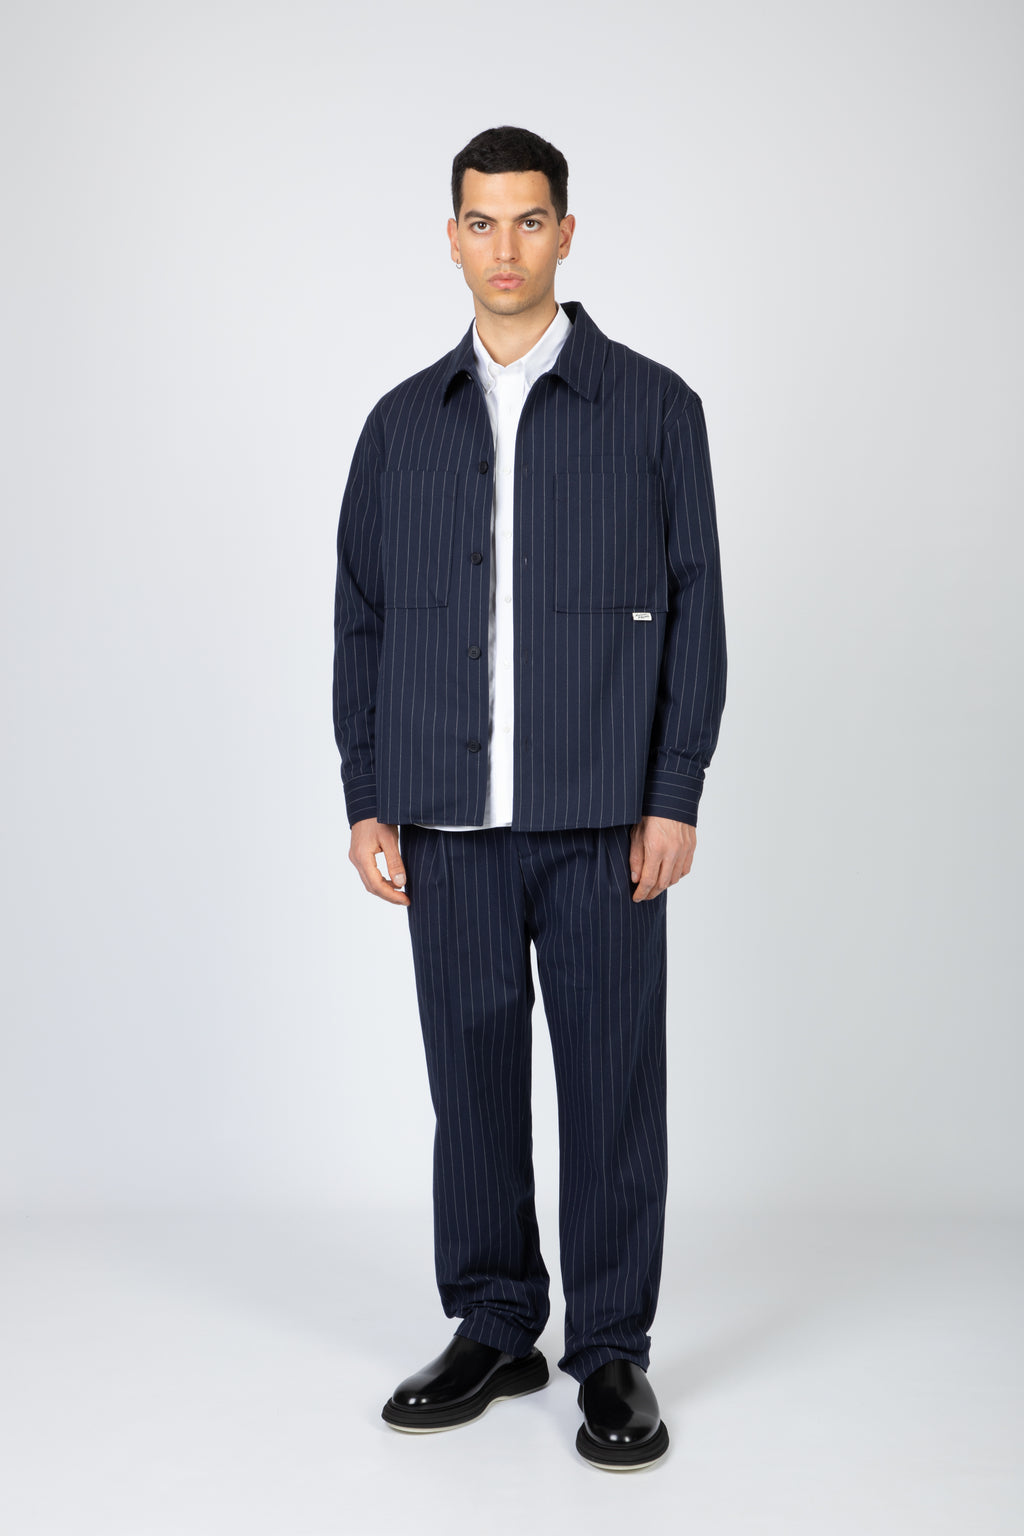 alt-image__Navy-blue-pinstriped-pleated-pants---Tailored-Pleated-Pants